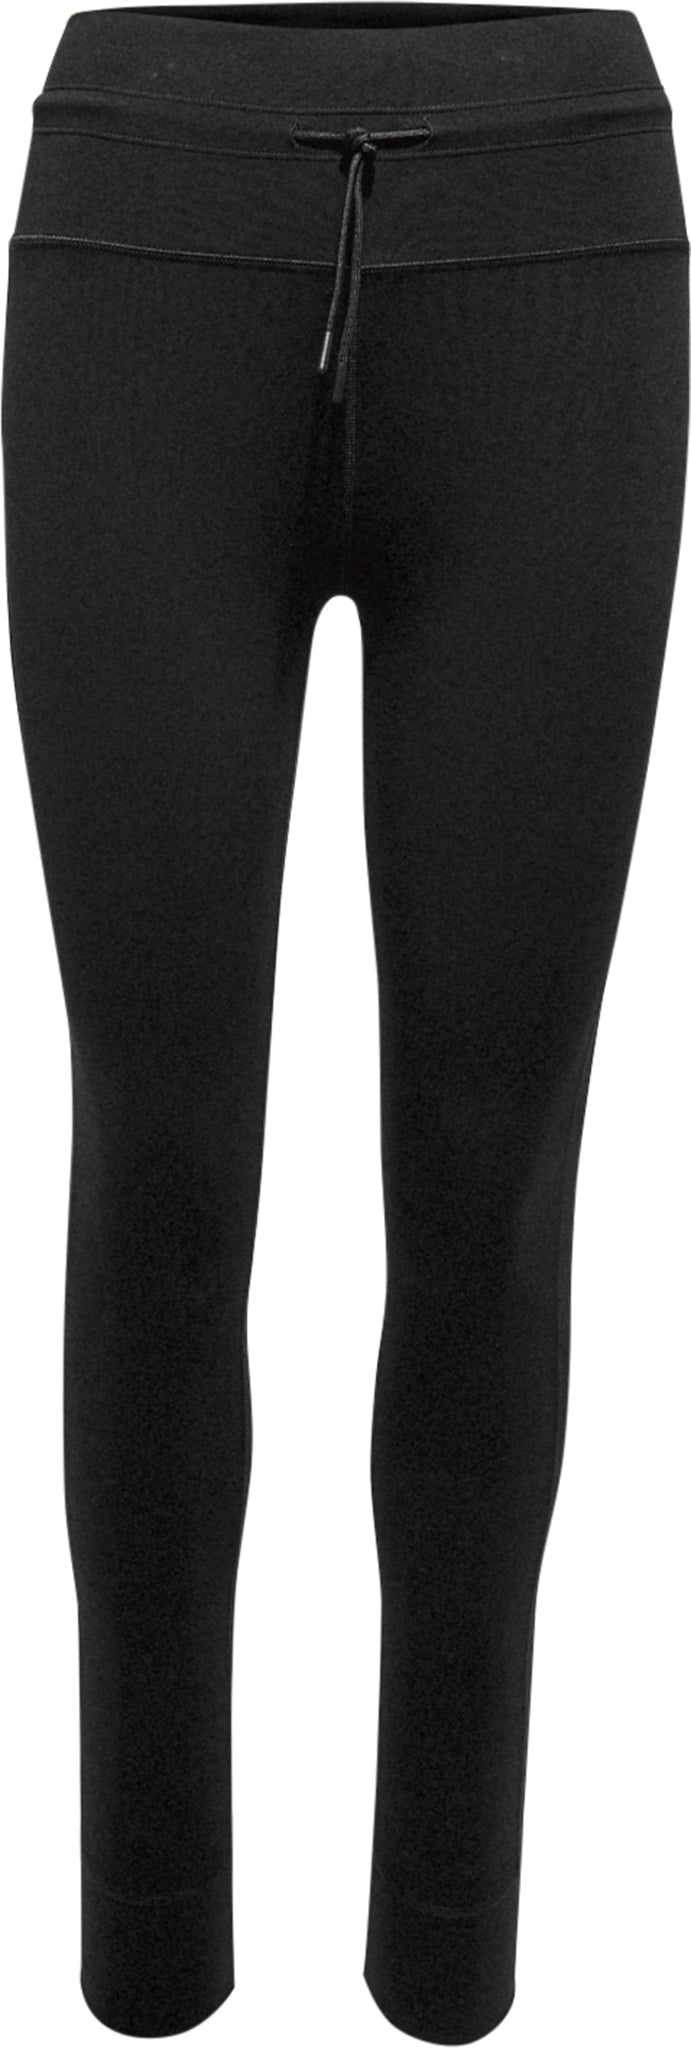 The North Face Black Leggings Girls size 6 XS athletic side pocket